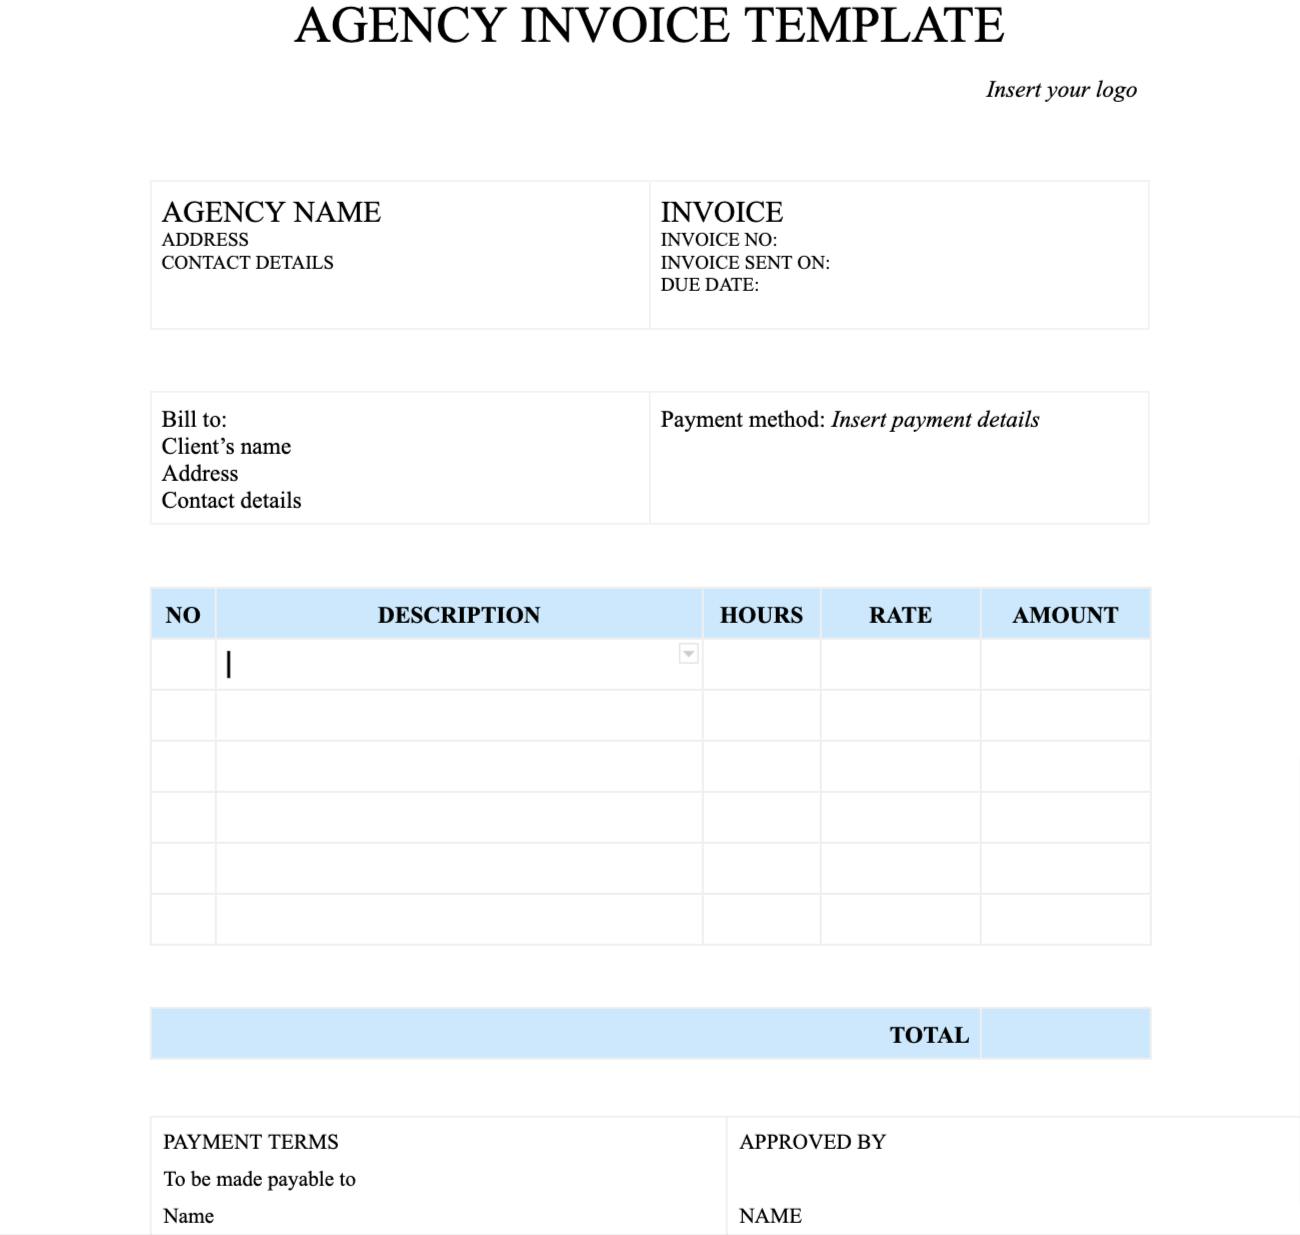 Agency invoice template in google docs